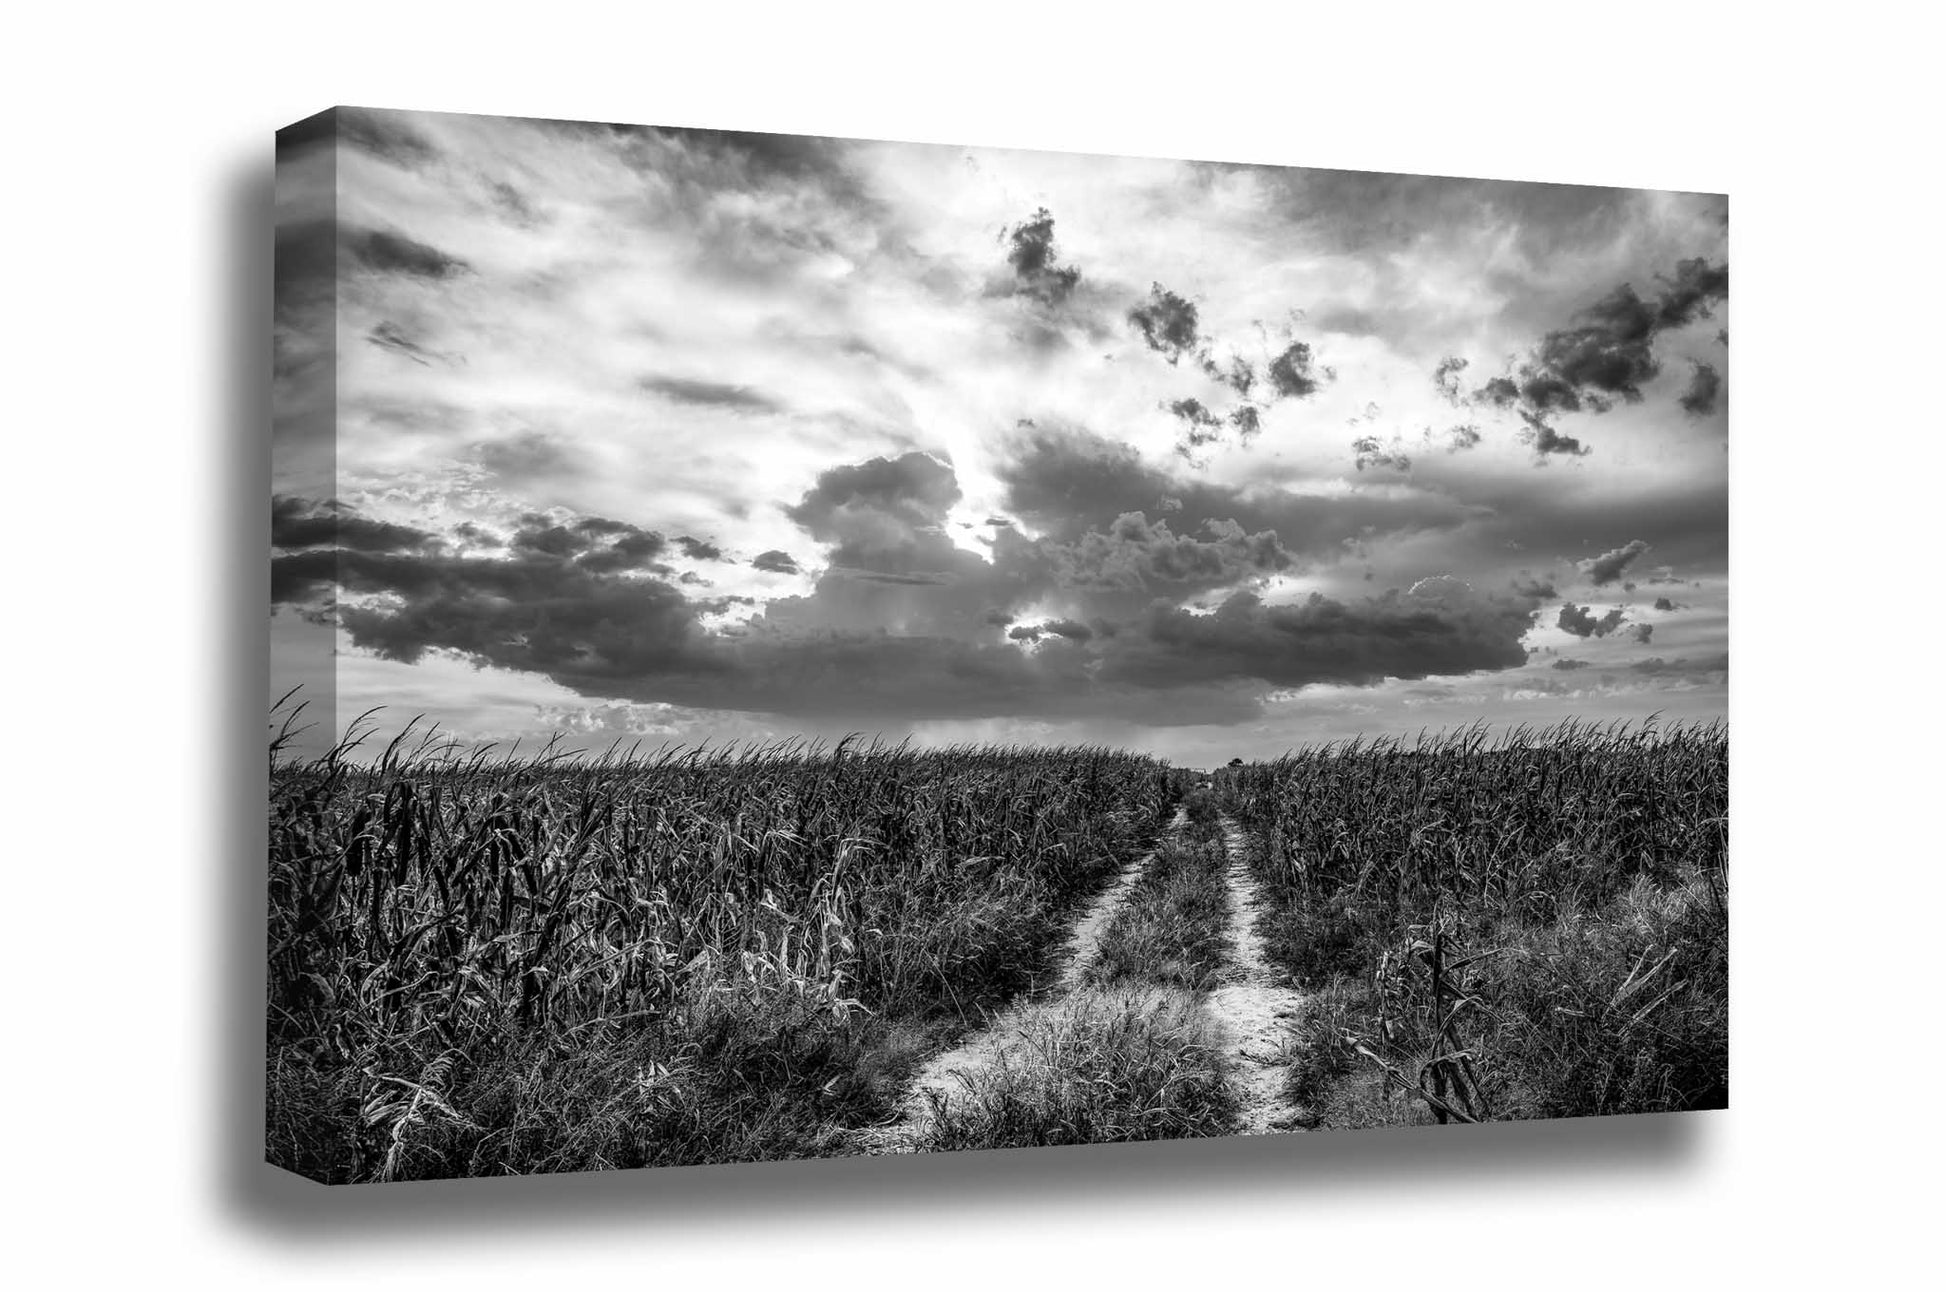 Black and white farm canvas wall art of a worn path through a corn field leading to a big Nebraska sky by Sean Ramsey of Southern Plains Photography.